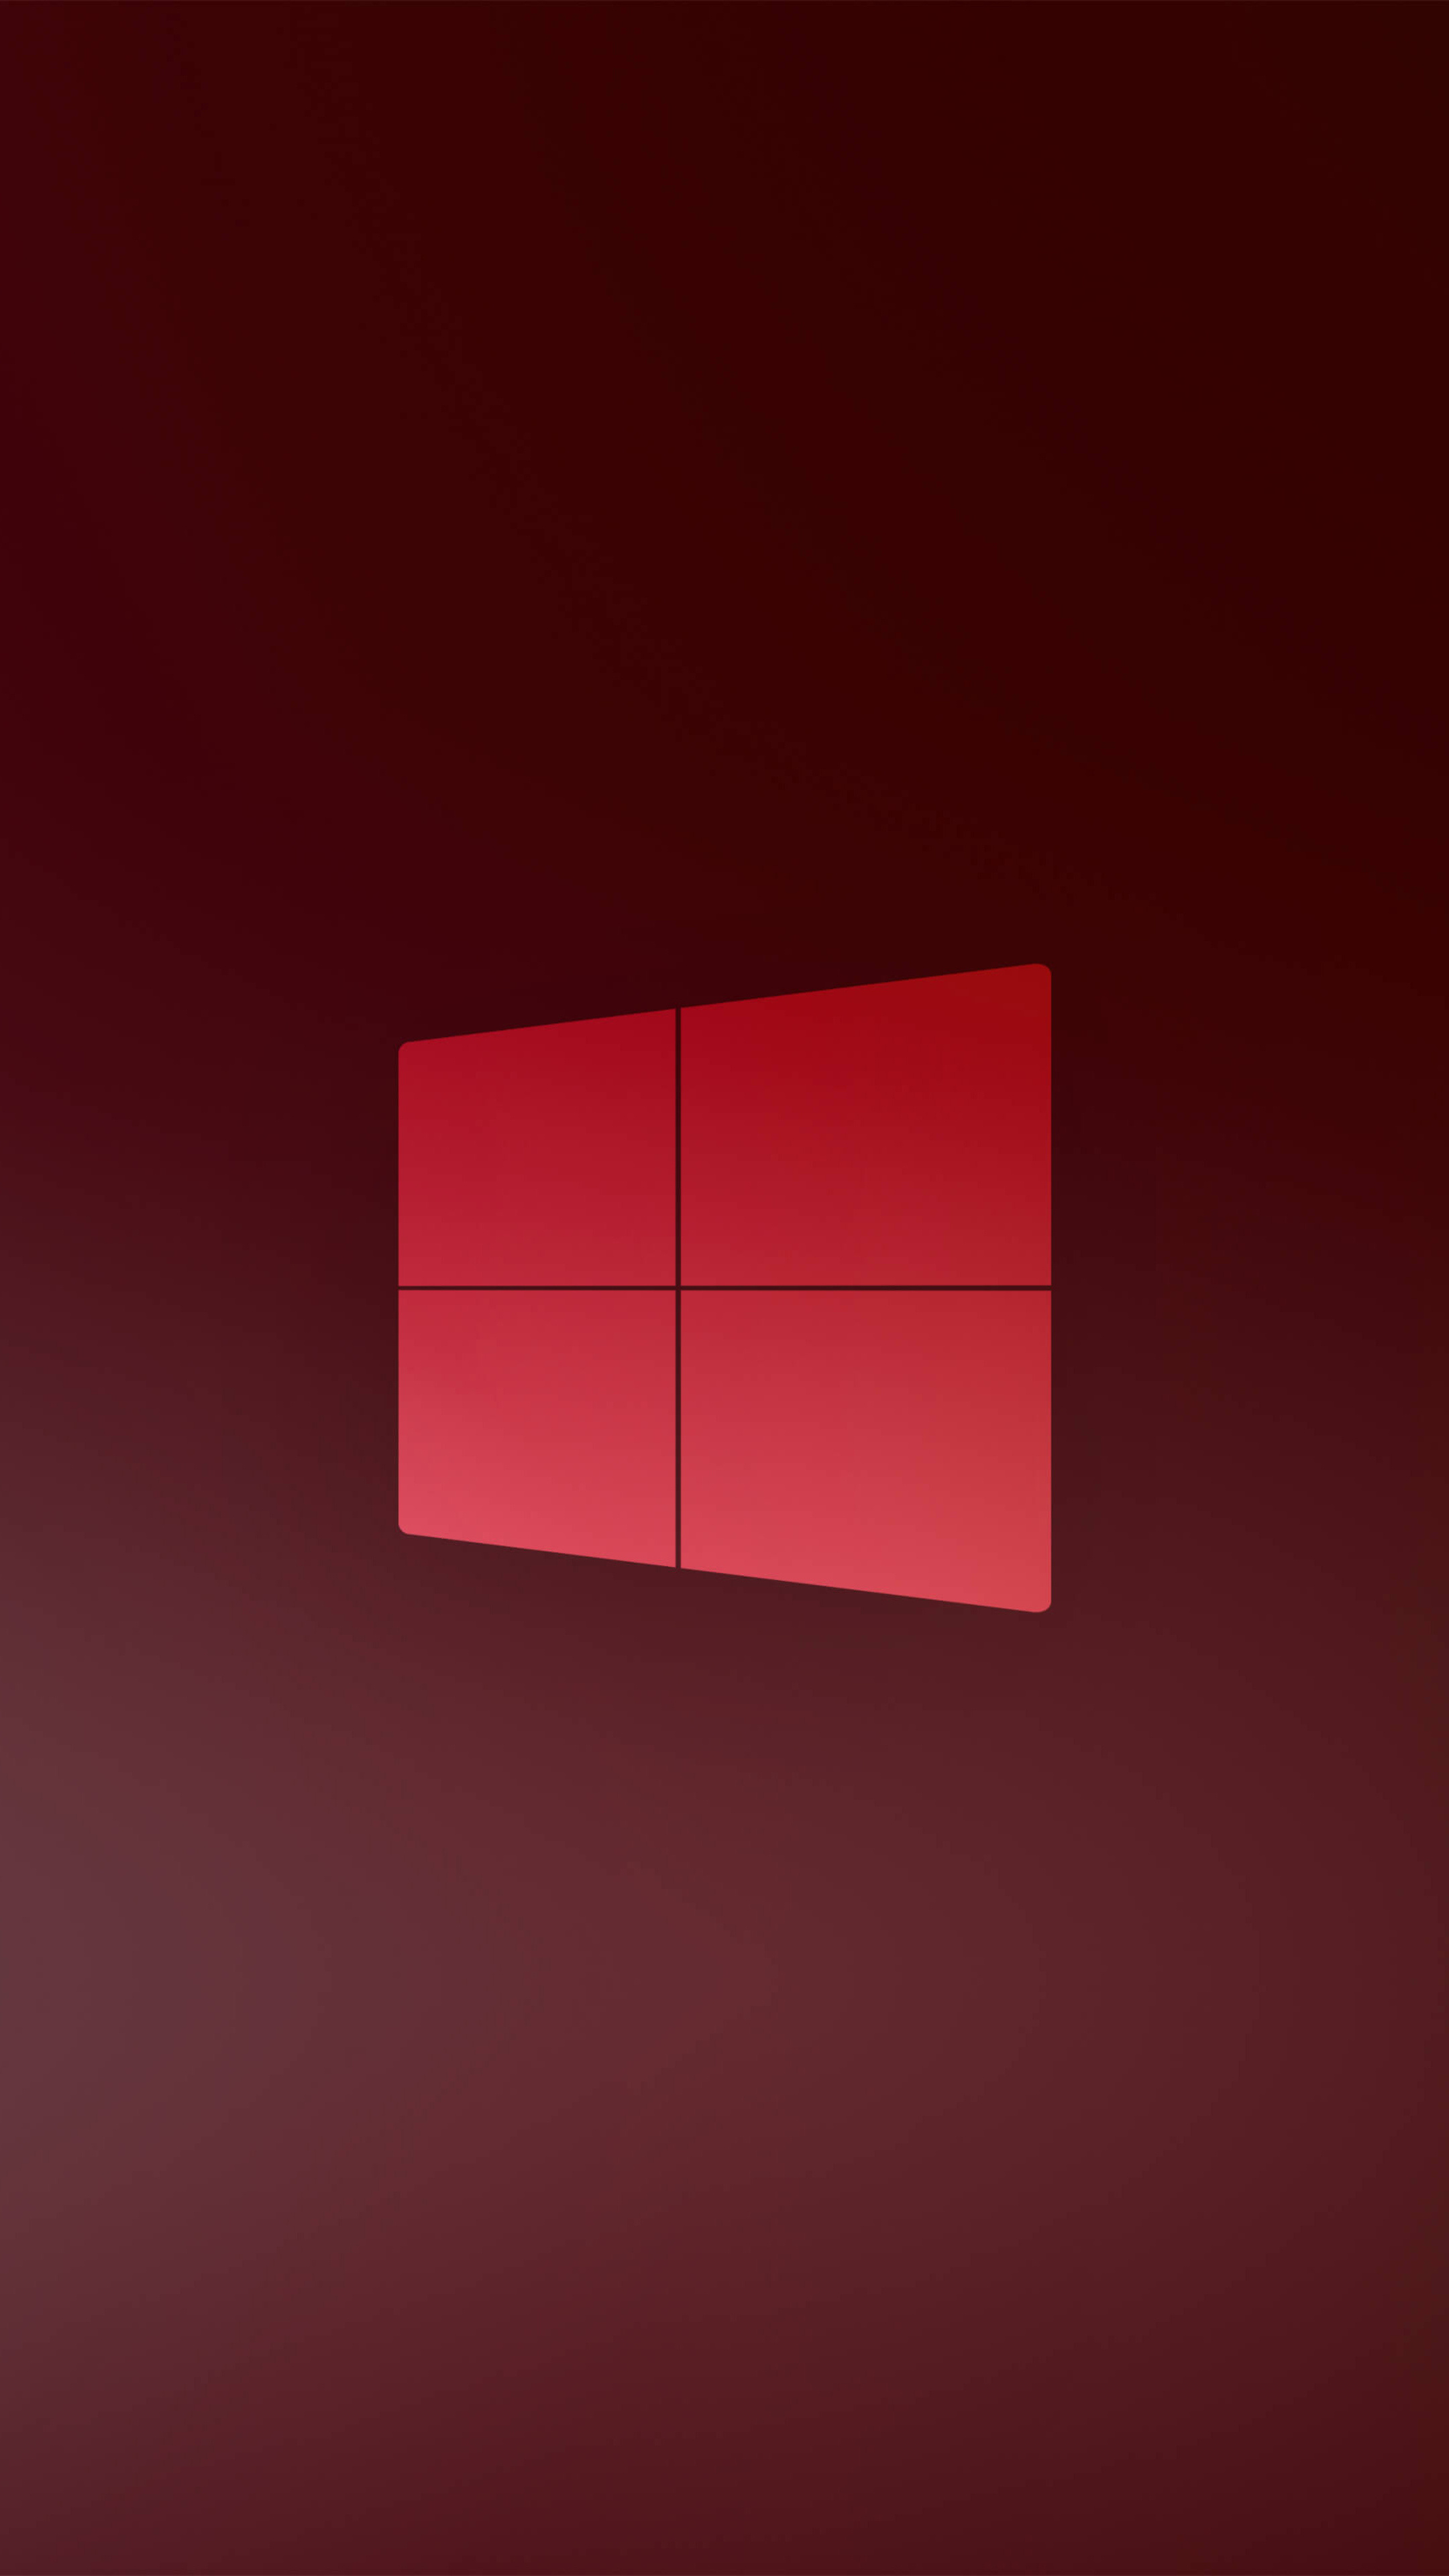 Microsoft: Windows 10, Red logo, The fourth-highest global brand valuation as of 2021. 2160x3840 4K Wallpaper.